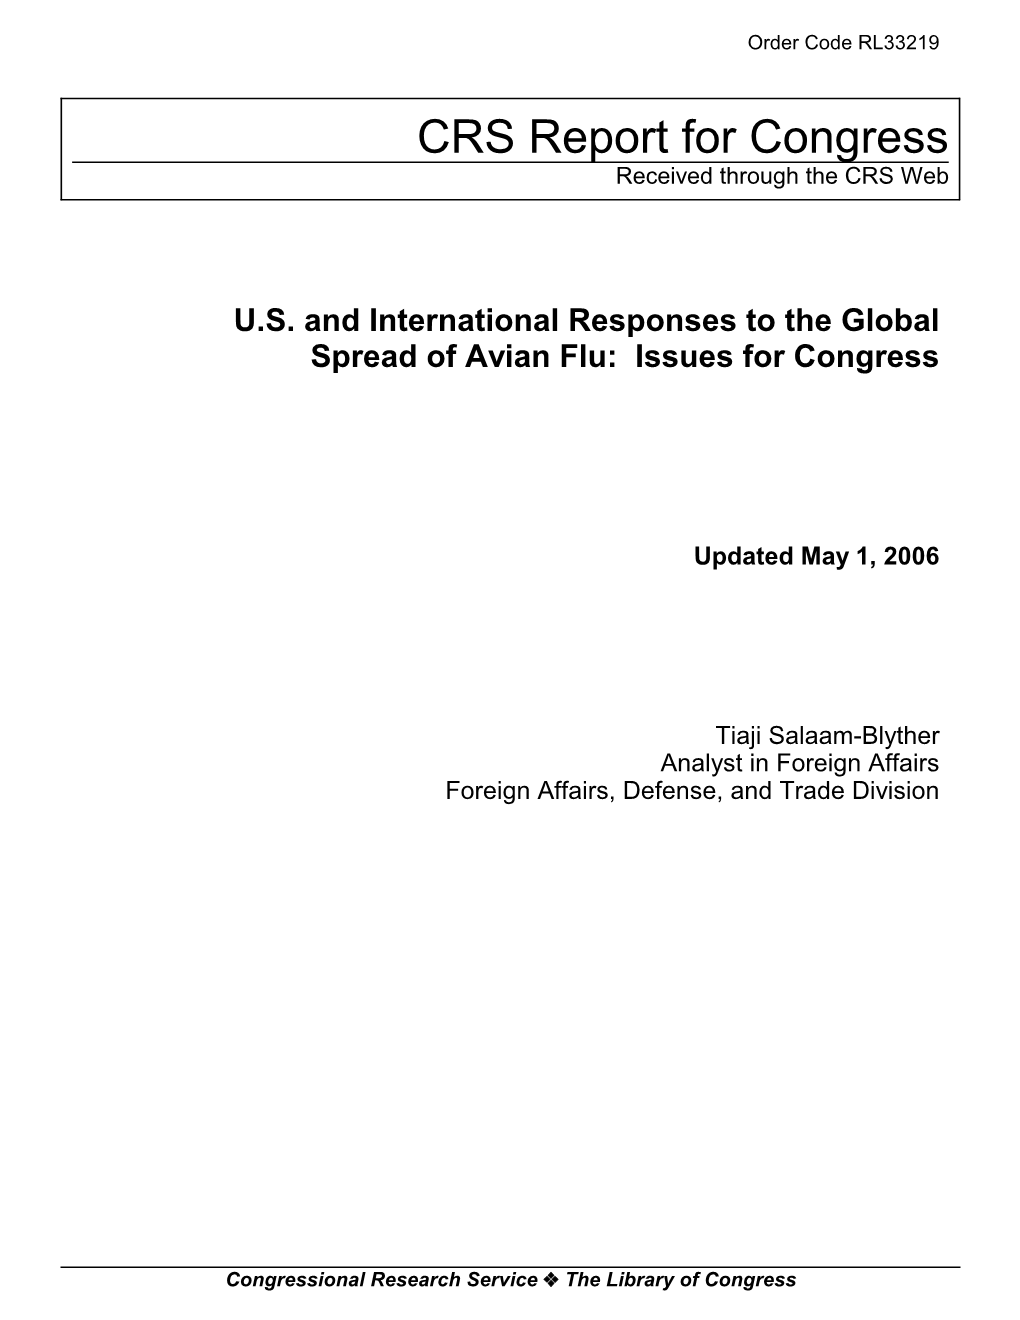 US and International Responses To